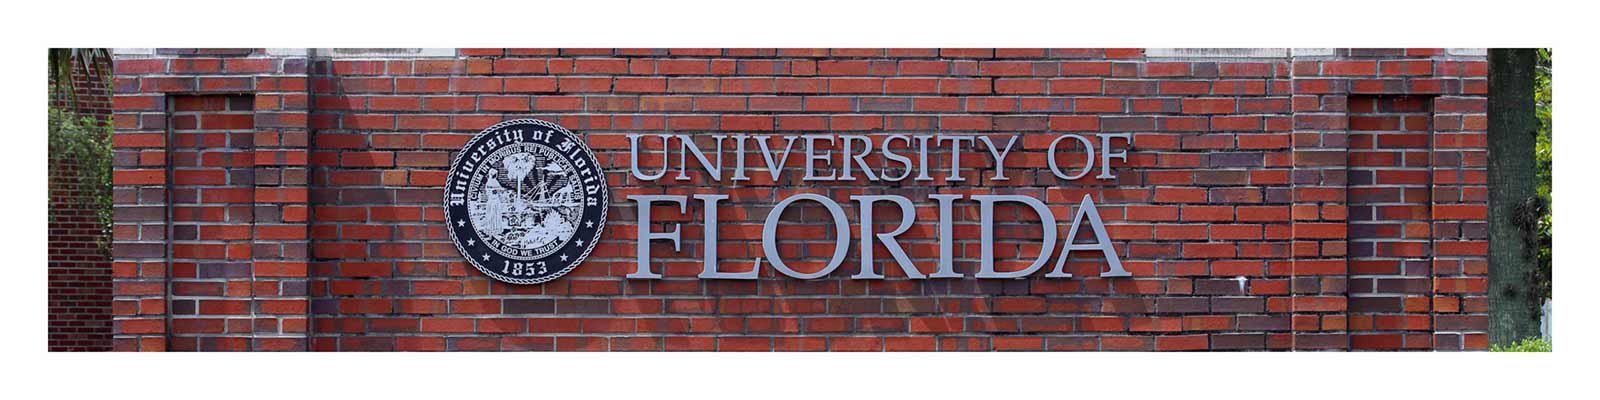 The University of Florida & The Role of University Expert Witnesses